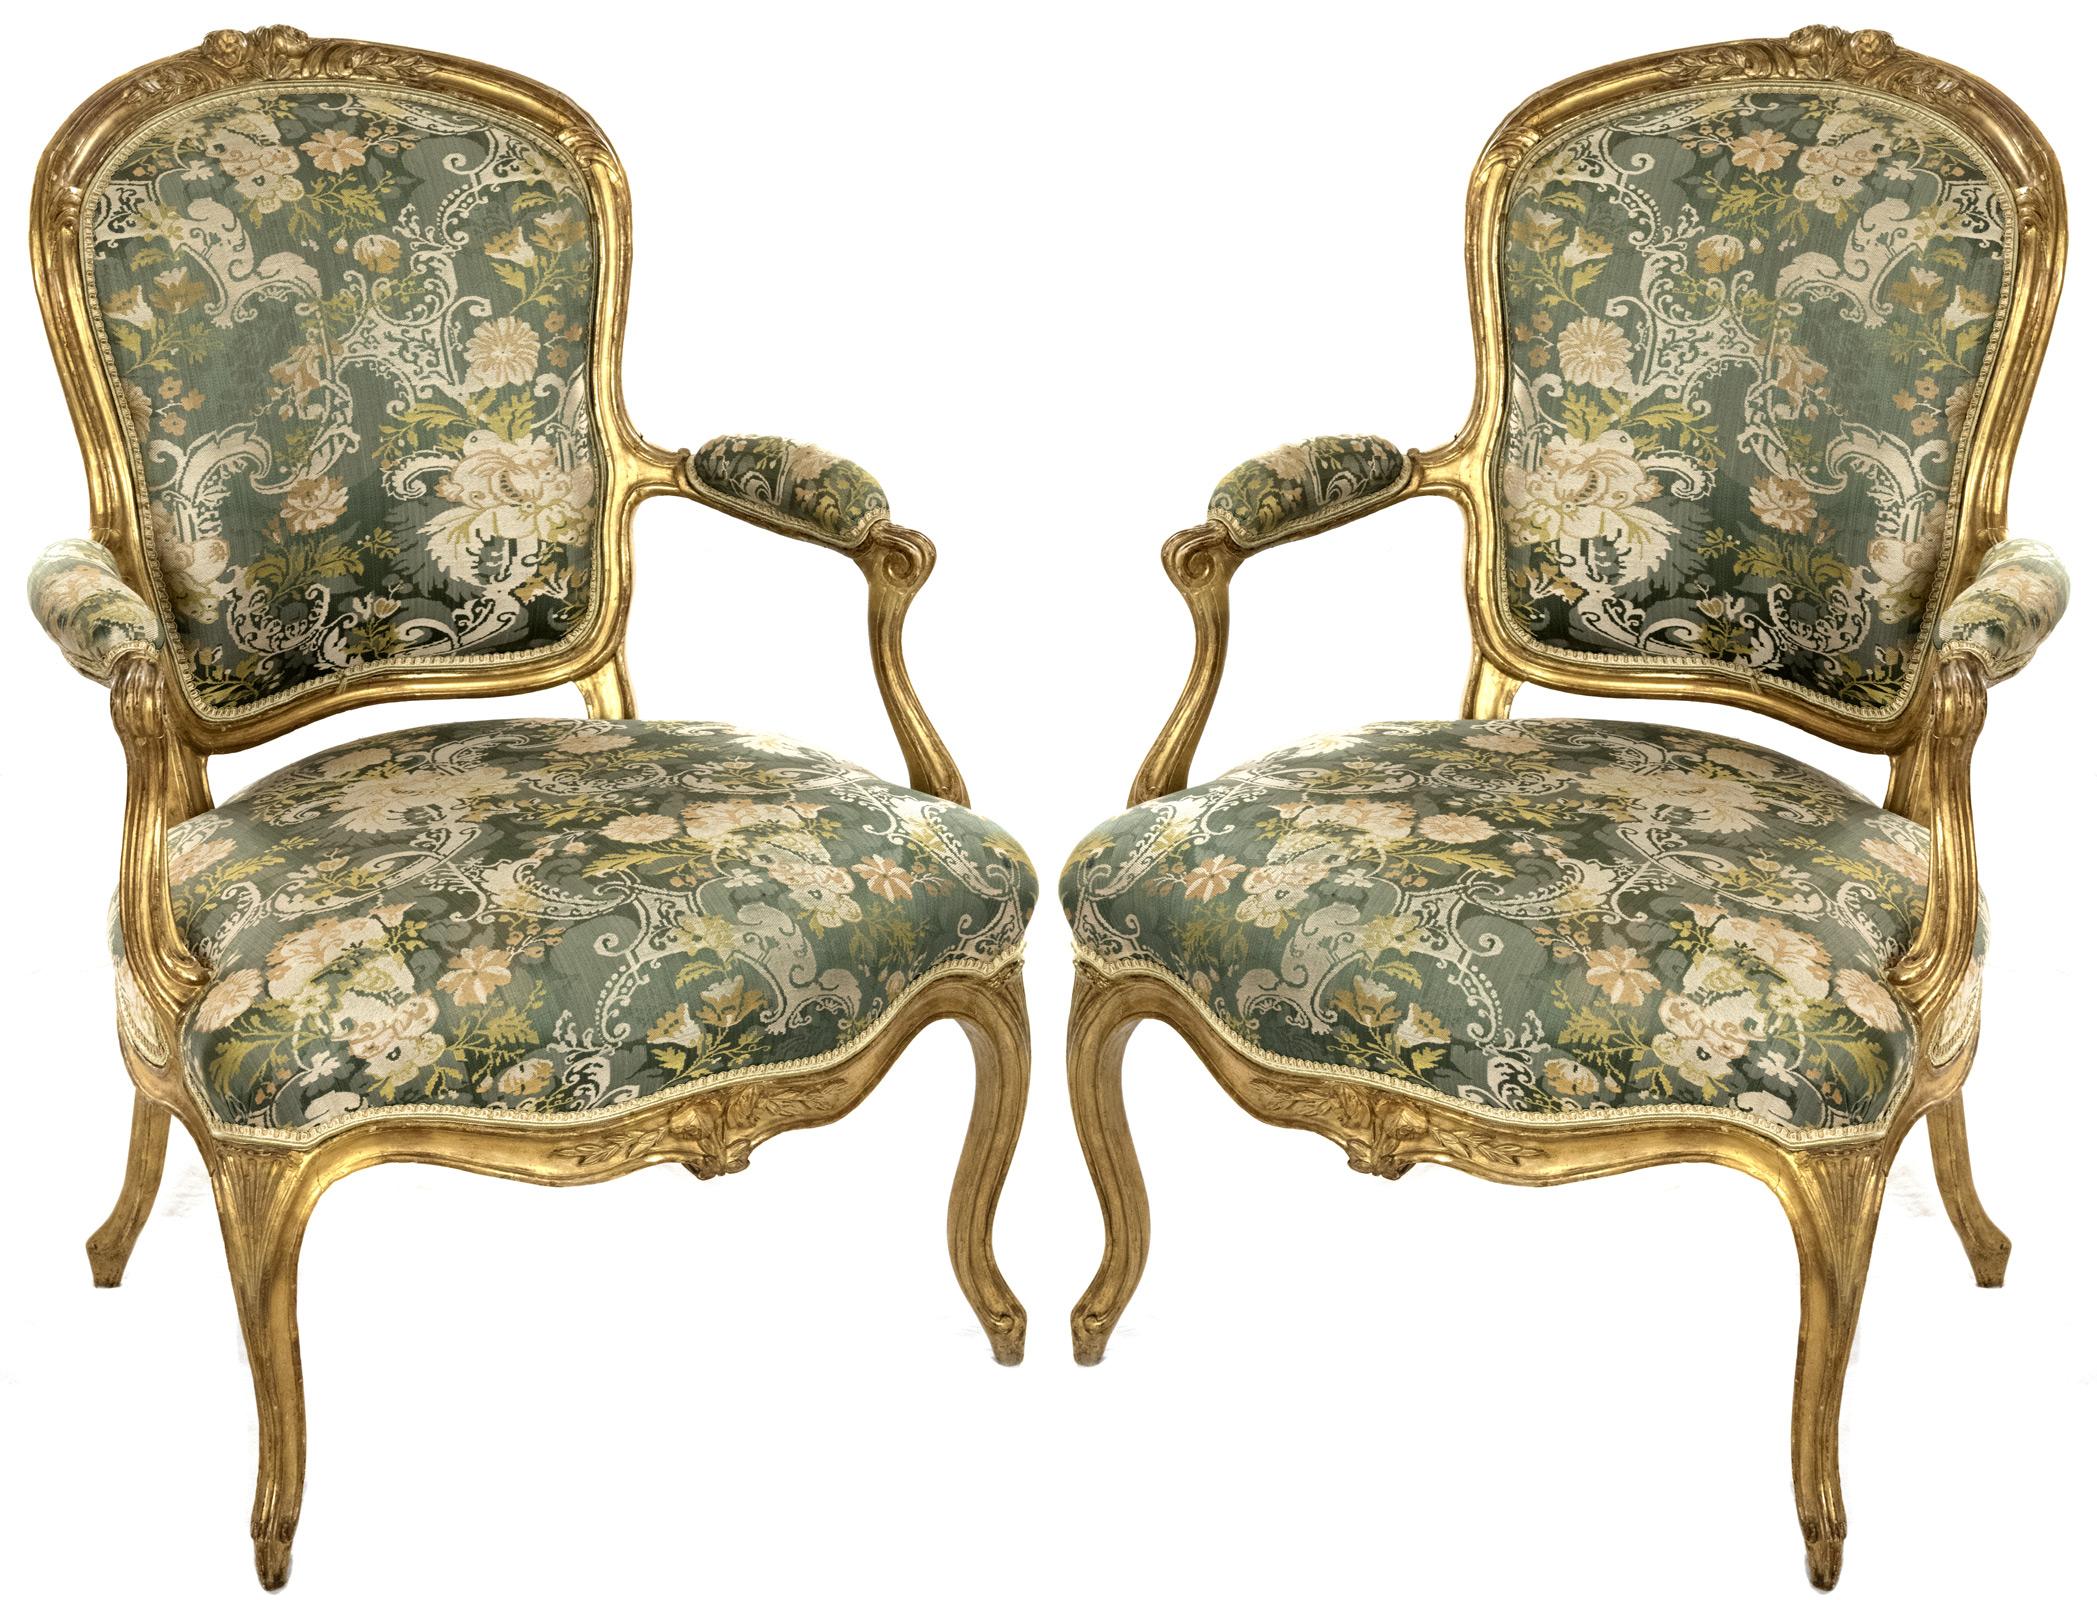 A pair of mid-18th century, circa 1755, Louis XV giltwood armchairs by Jean-Baptiste Lebas (French, 1729-after 1795), the cartouche-form backrest and broad seat are upholstered in a floral needlepoint pattern, with arms with conforming manchettes.